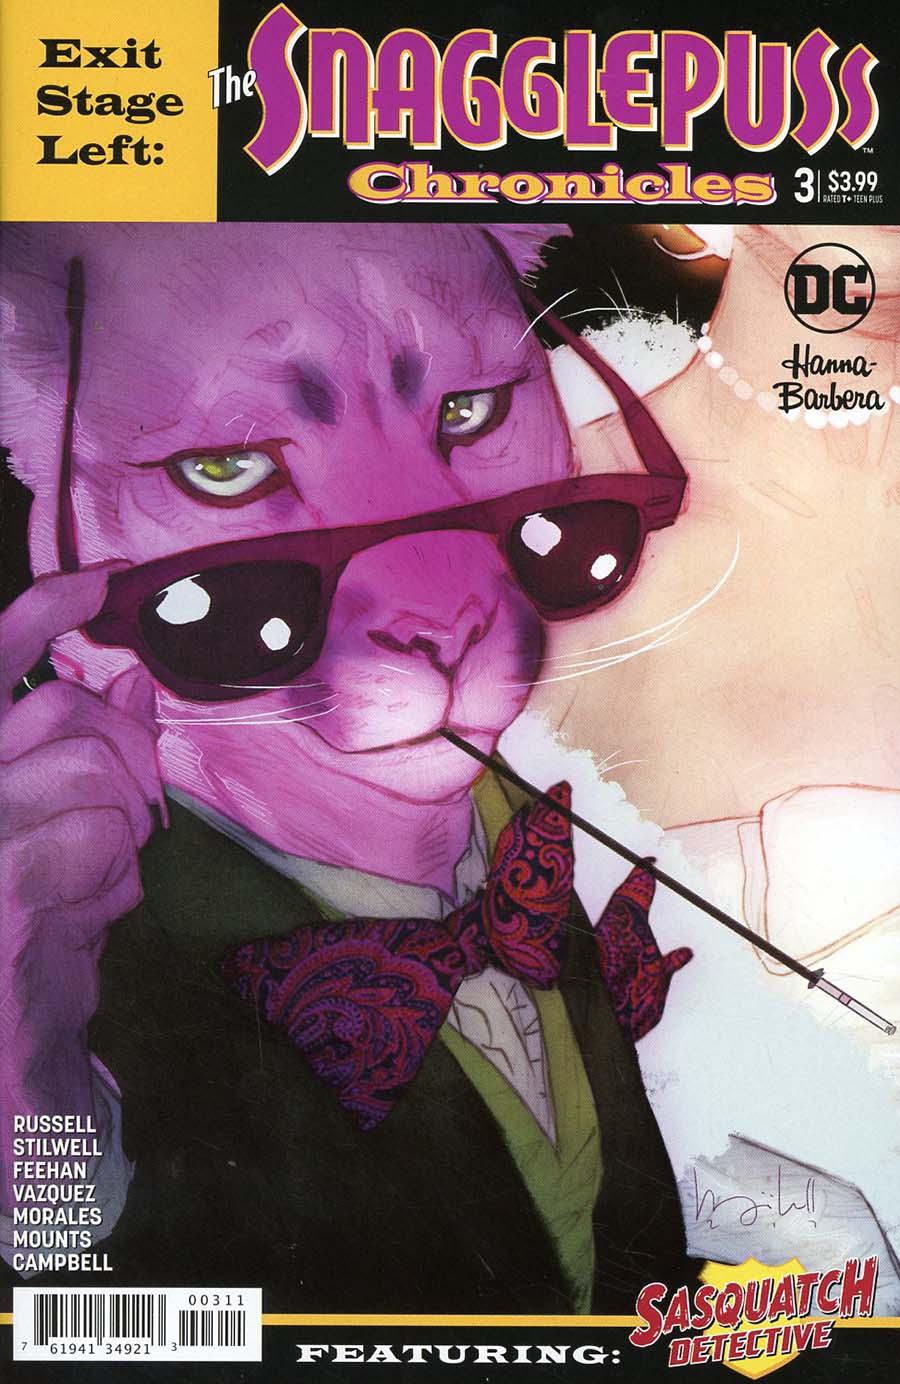 Exit Stage Left The Snagglepuss Chronicles Vol. 1 #3